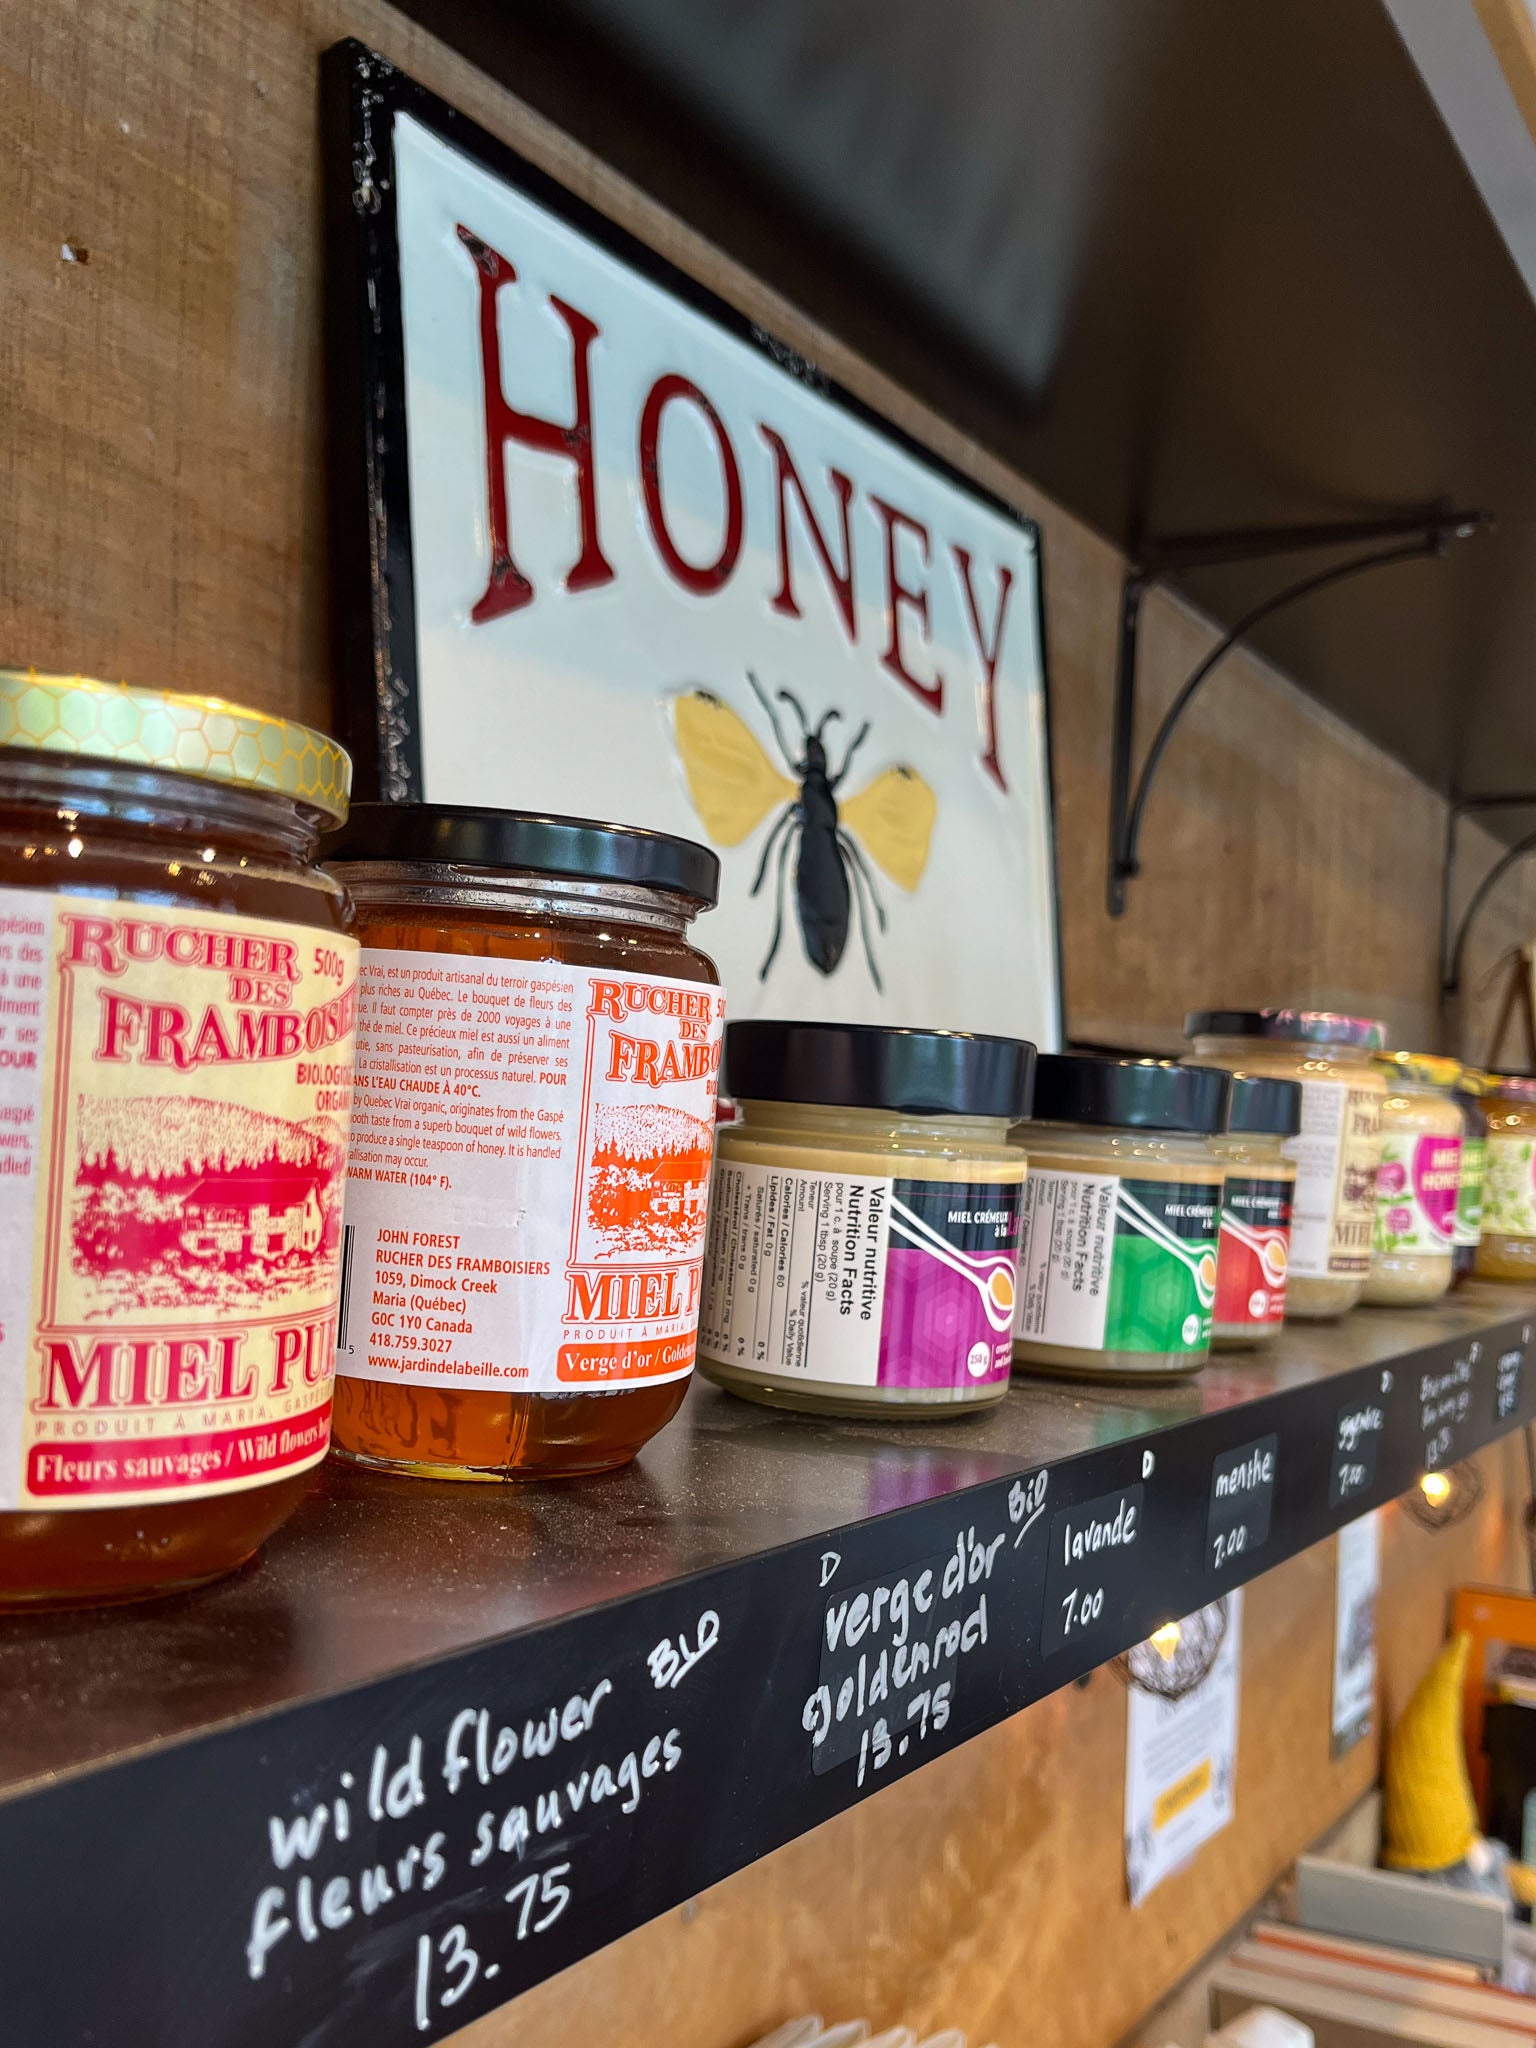 A shelf full of jars of Quebec honey with a "honey" sign on the shelf behind the honey